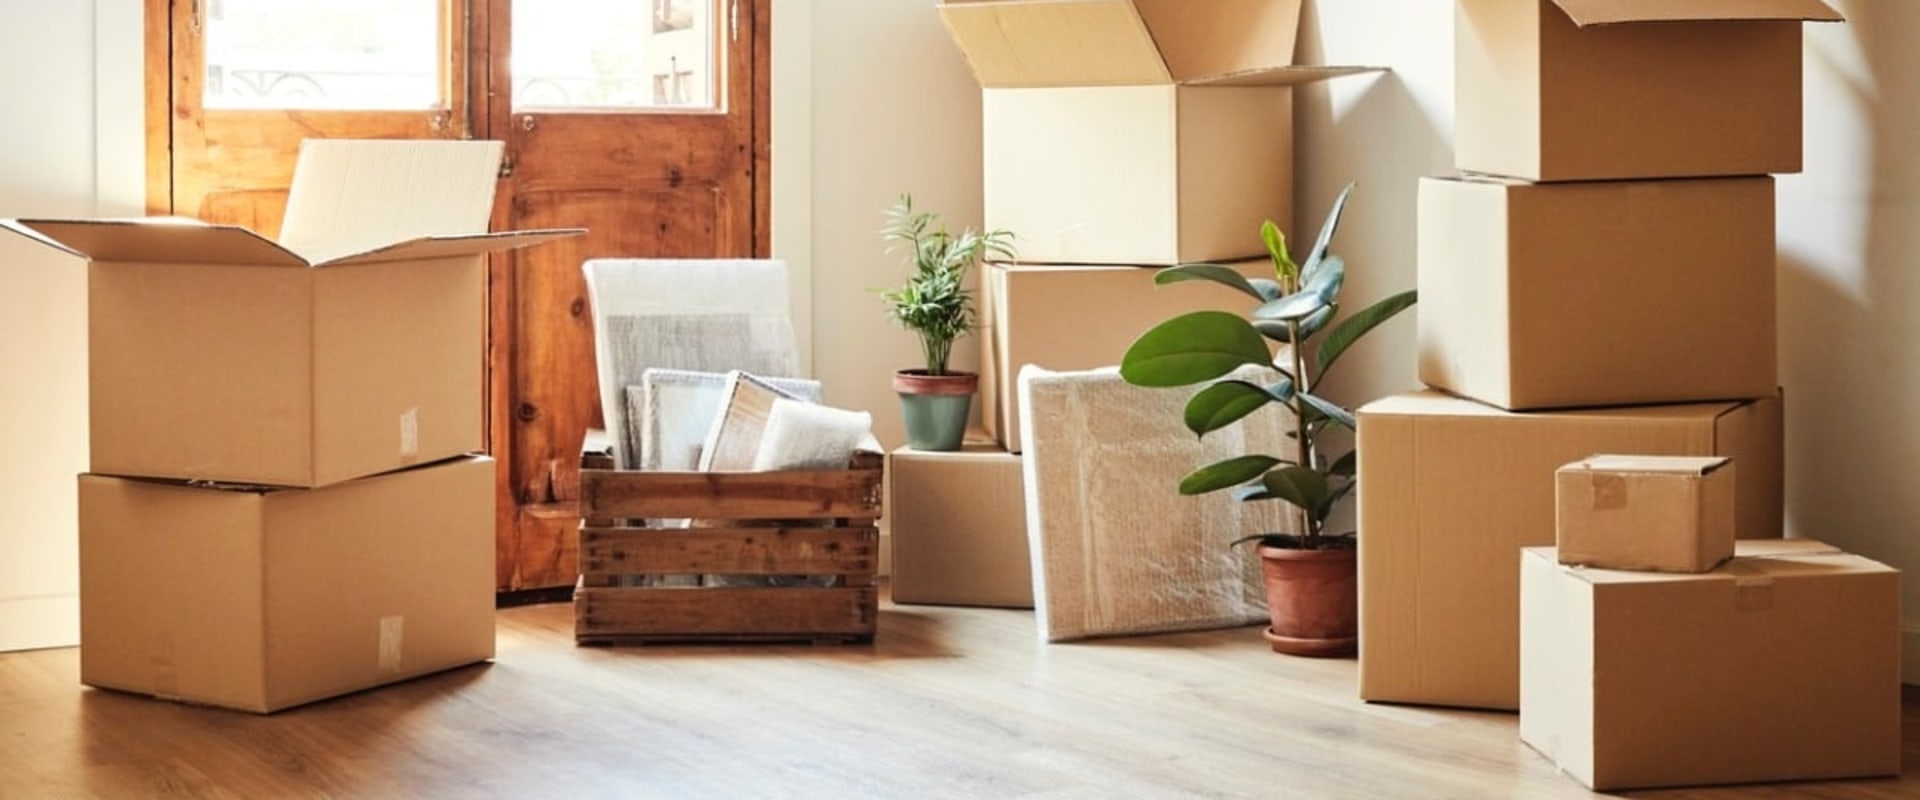 Packing and Unpacking Tips for a Smooth Move